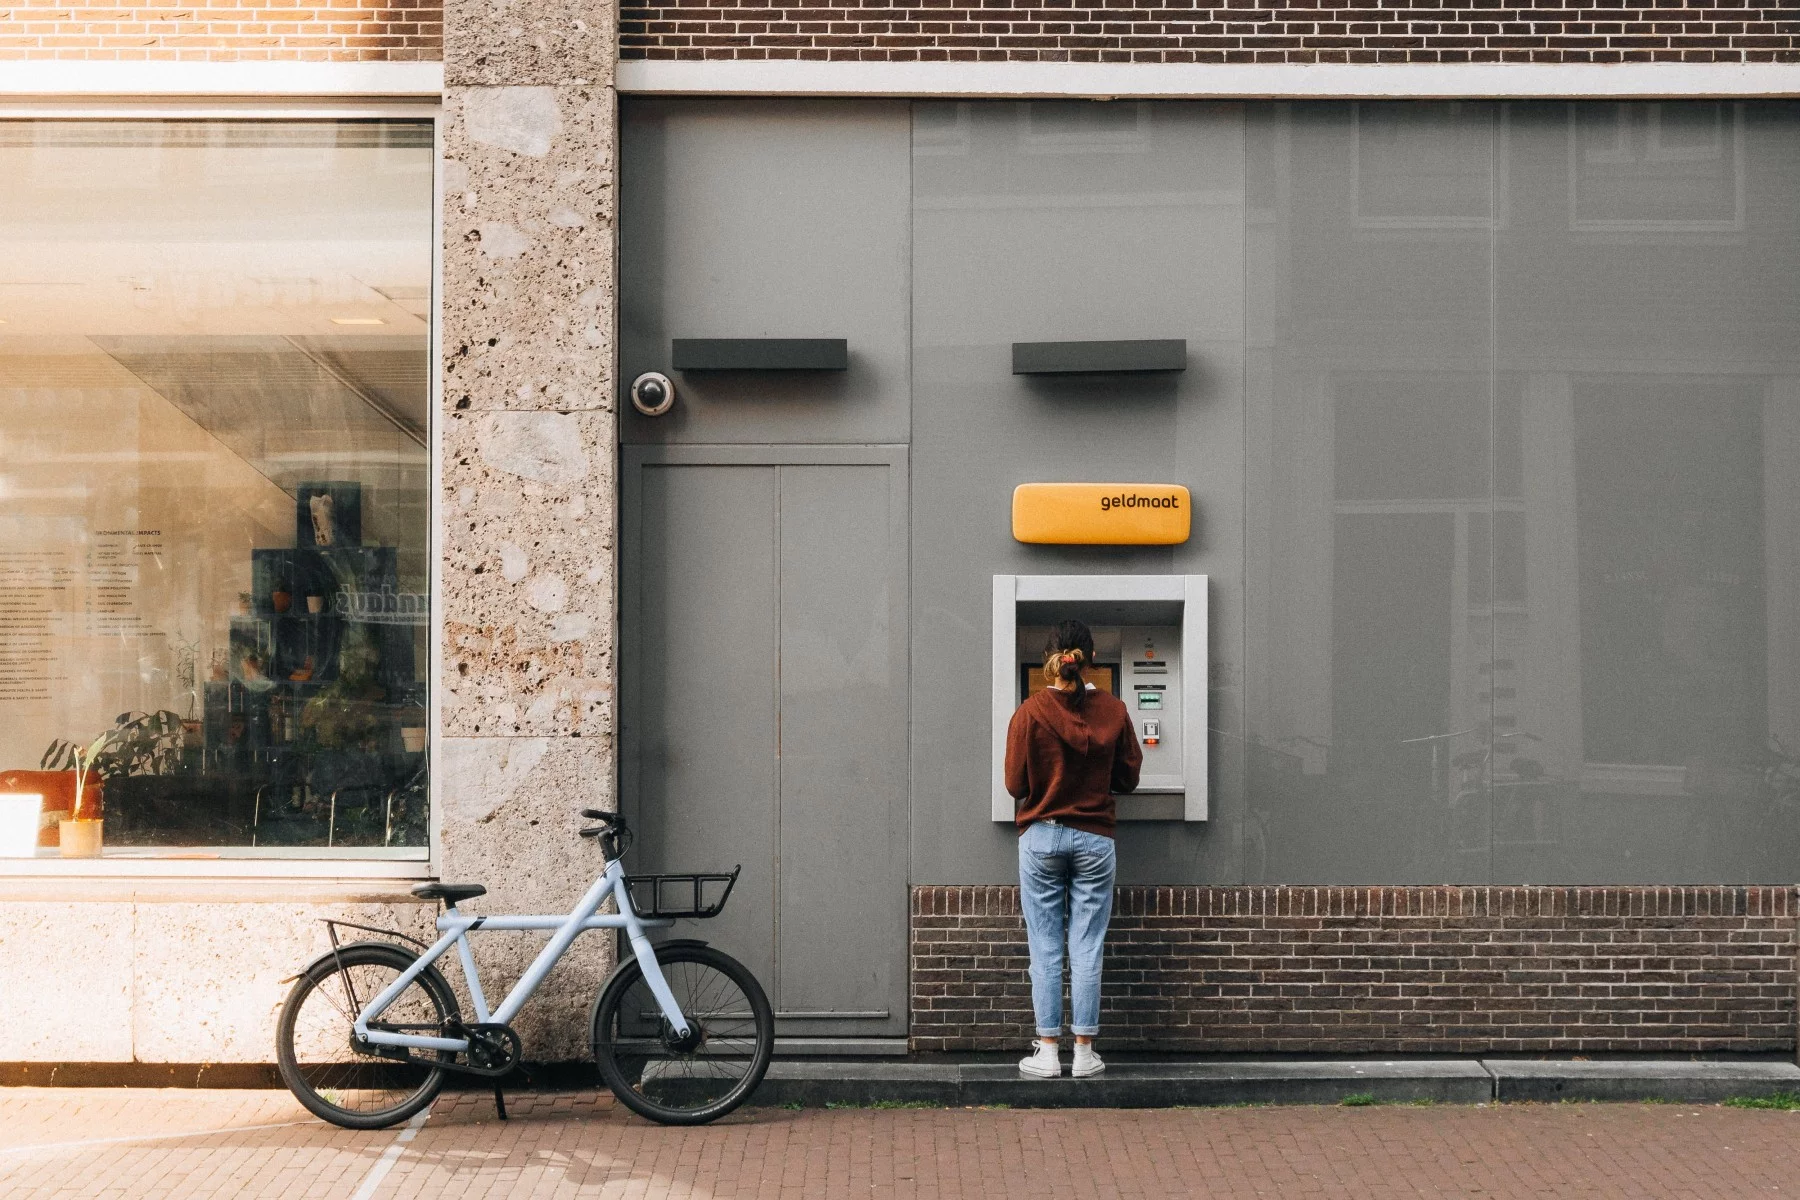 Woman standing with an ATM in the Netherlands.